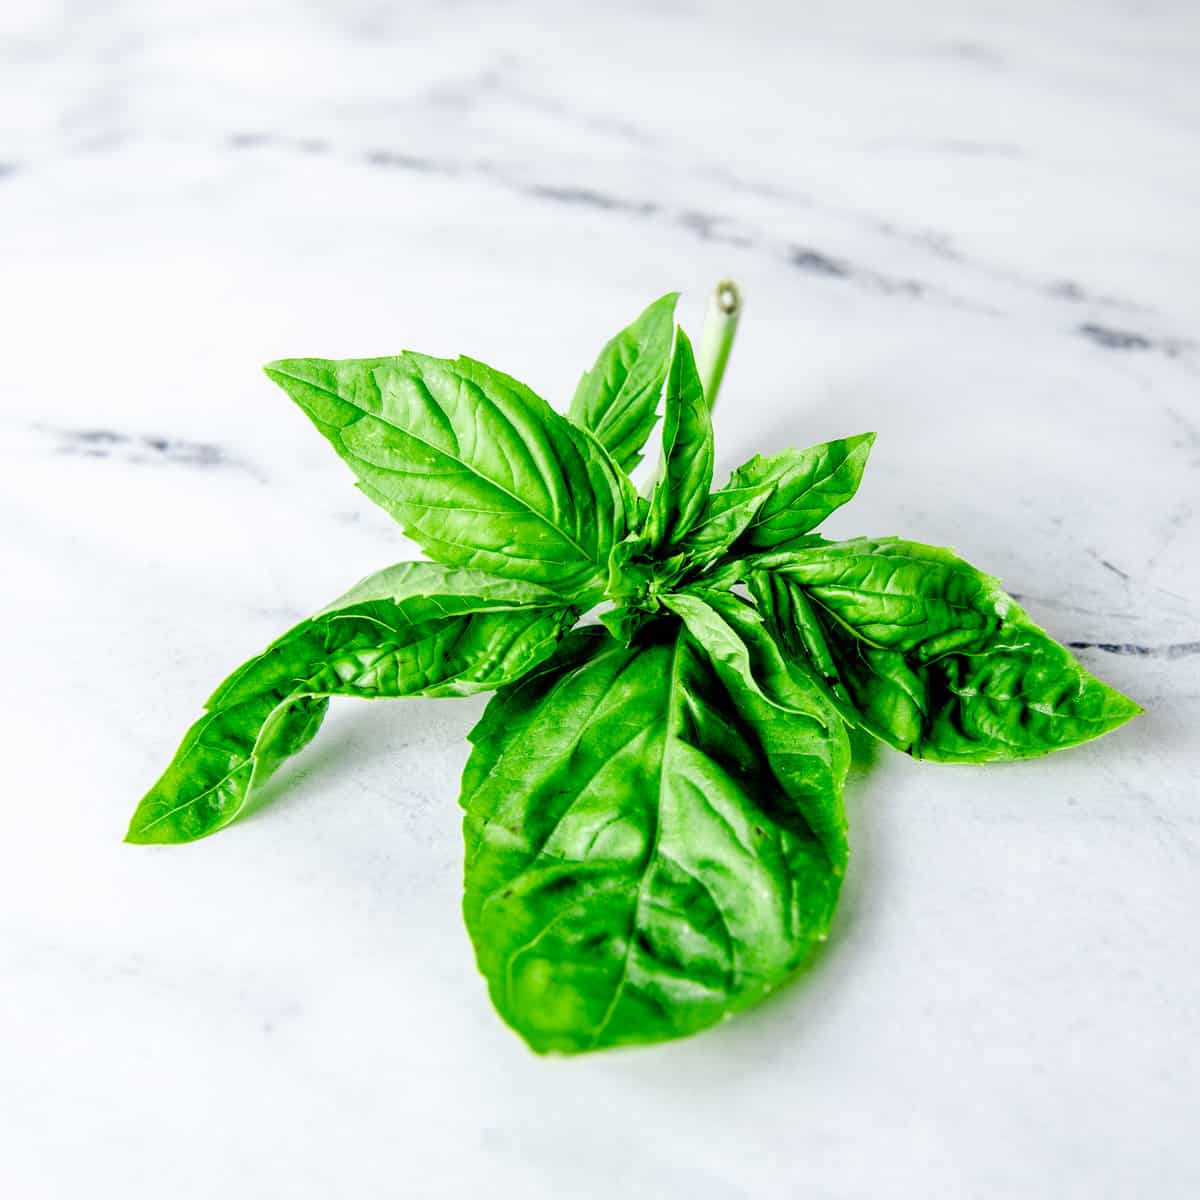 Basil bunch on a kitchen counter.